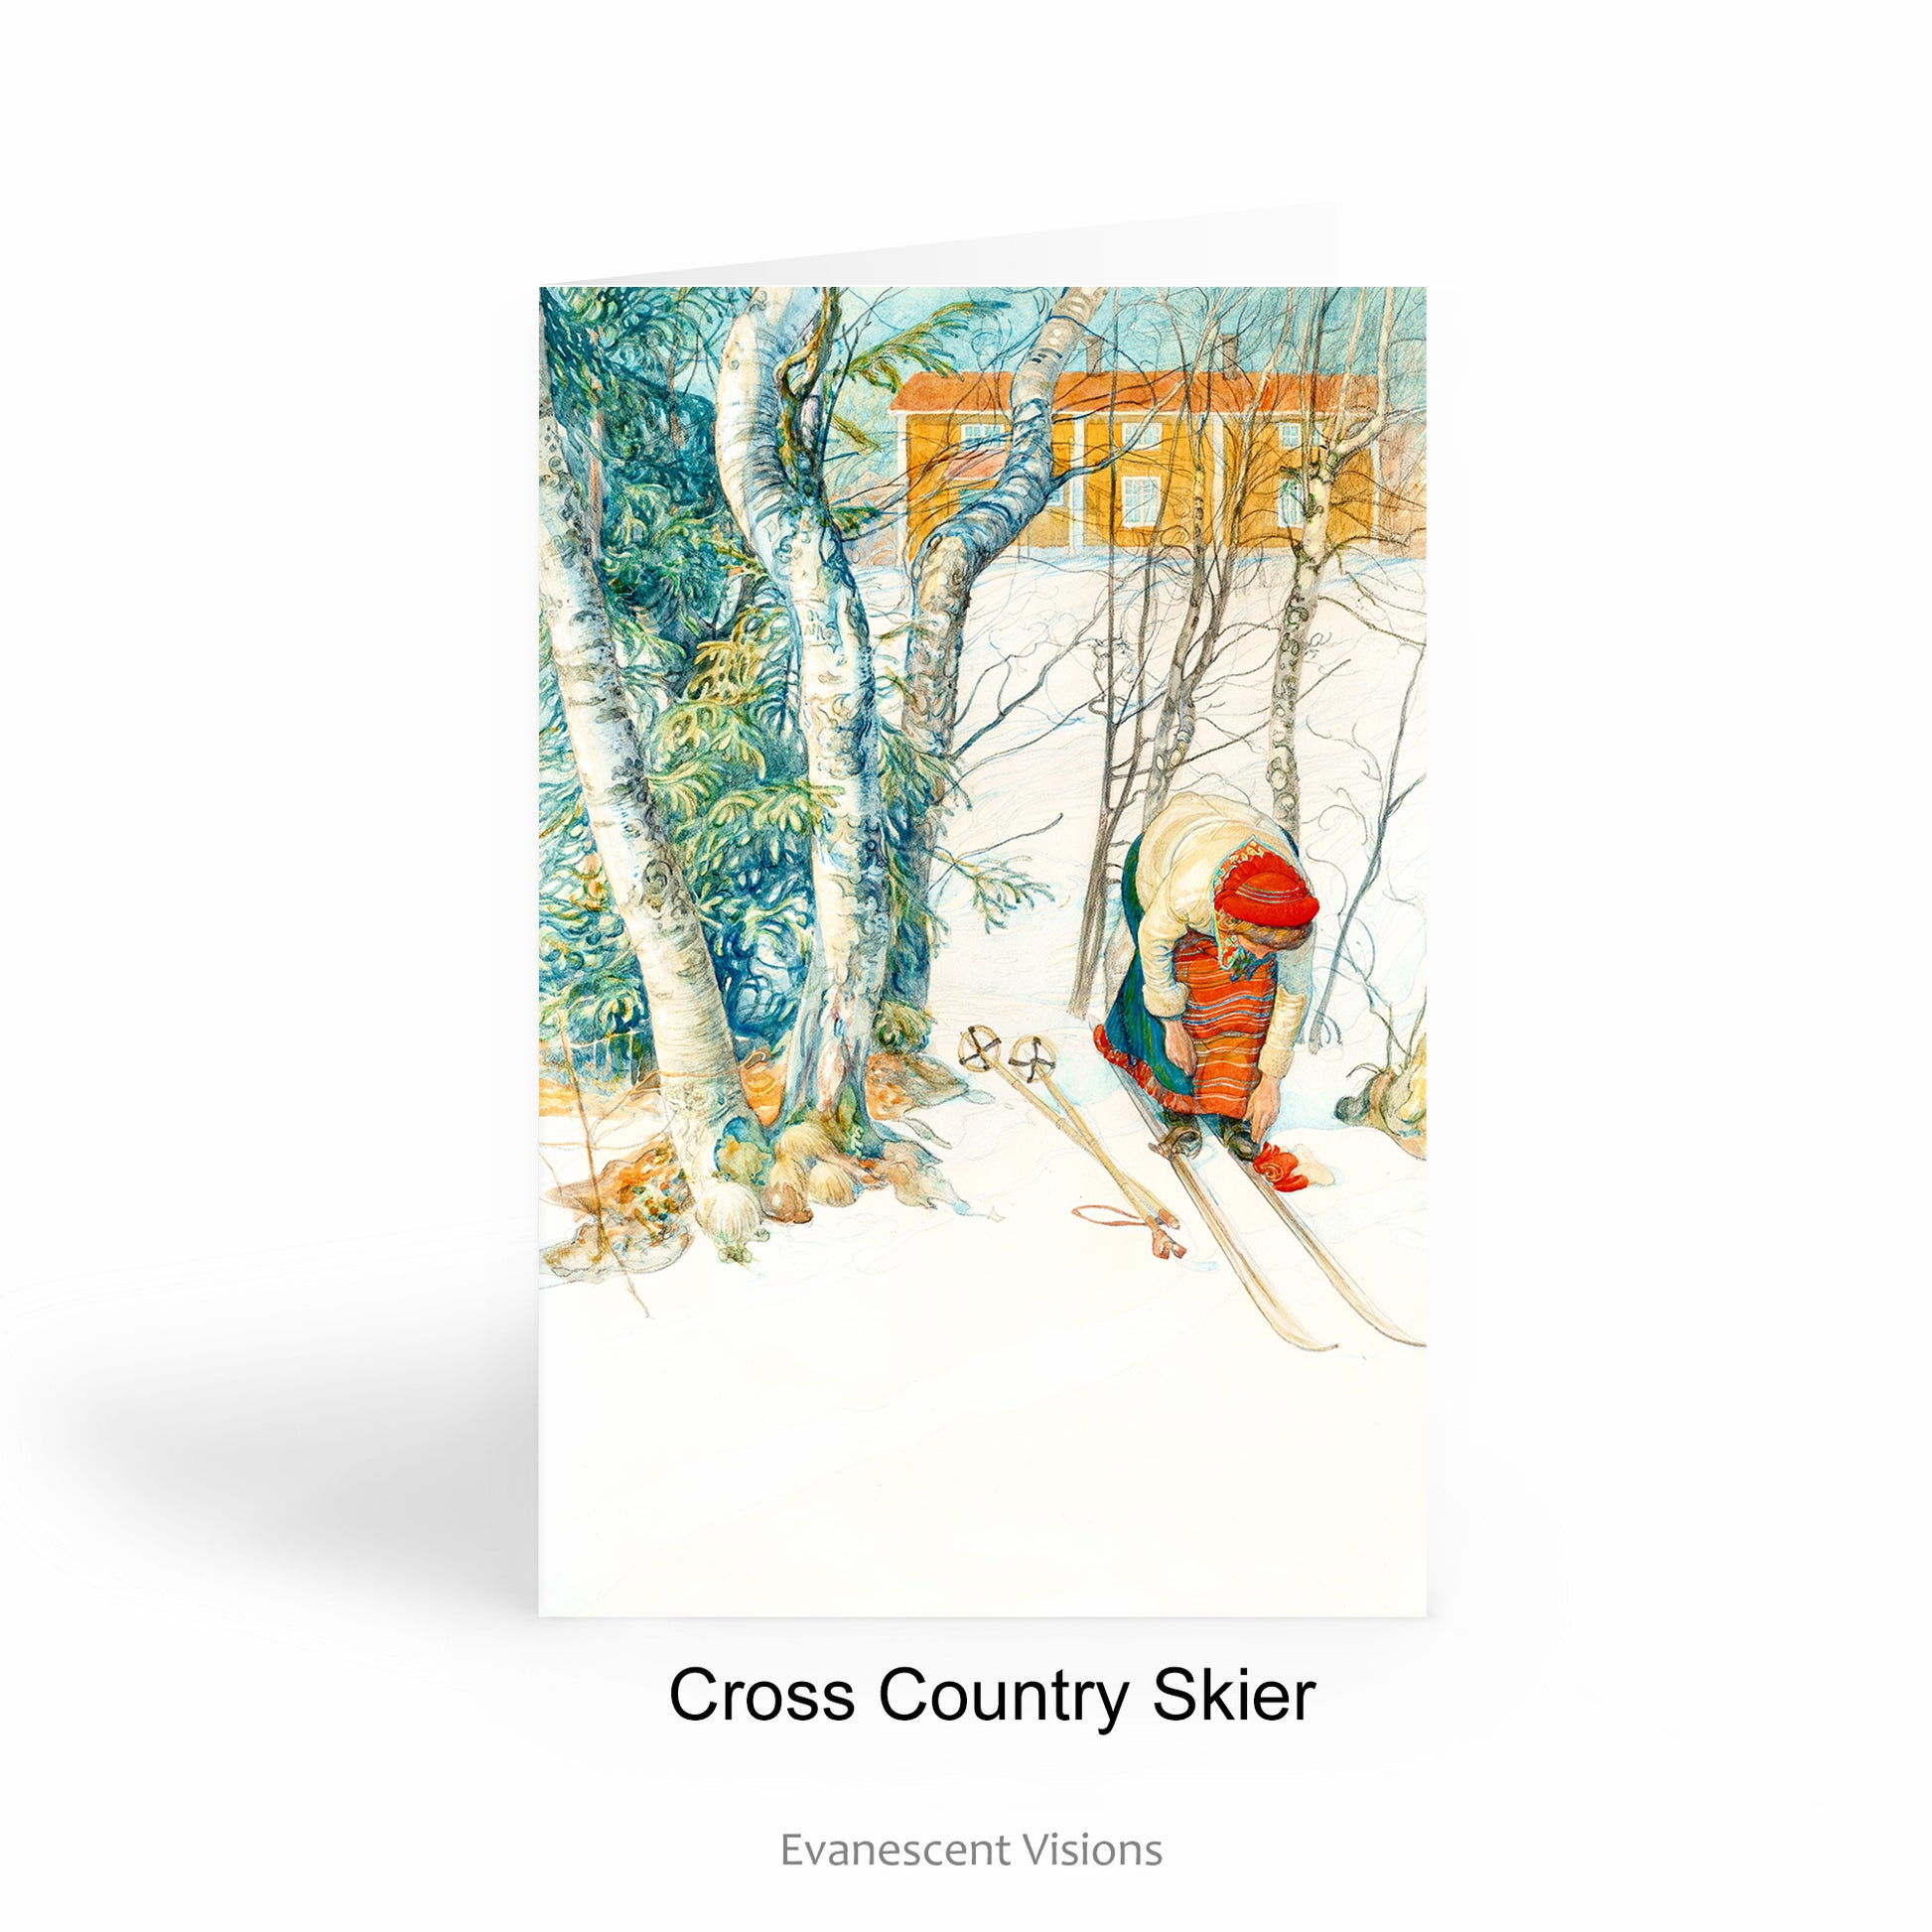 Snowy landscape and Winter or Christmas Art Cards with Painting Cross Country Skier by Carl Larsson.